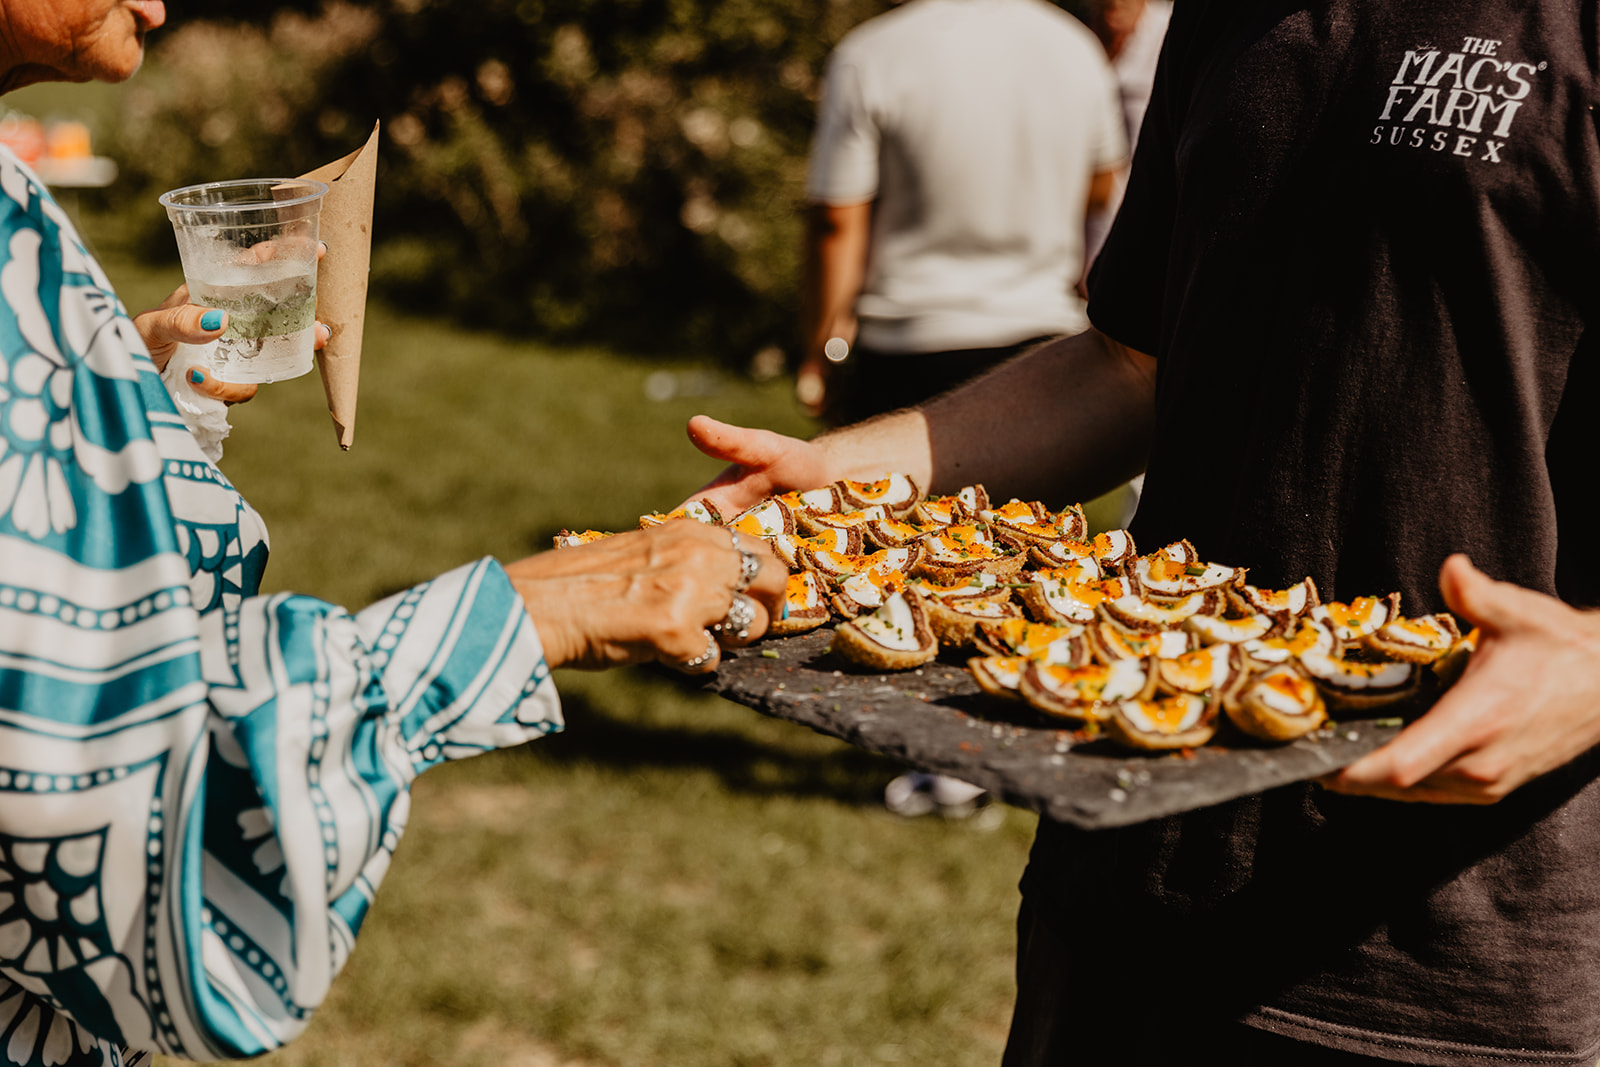 Wedding food at a wedding at Mac's Farm in Sussex. By OliveJoy Photography.